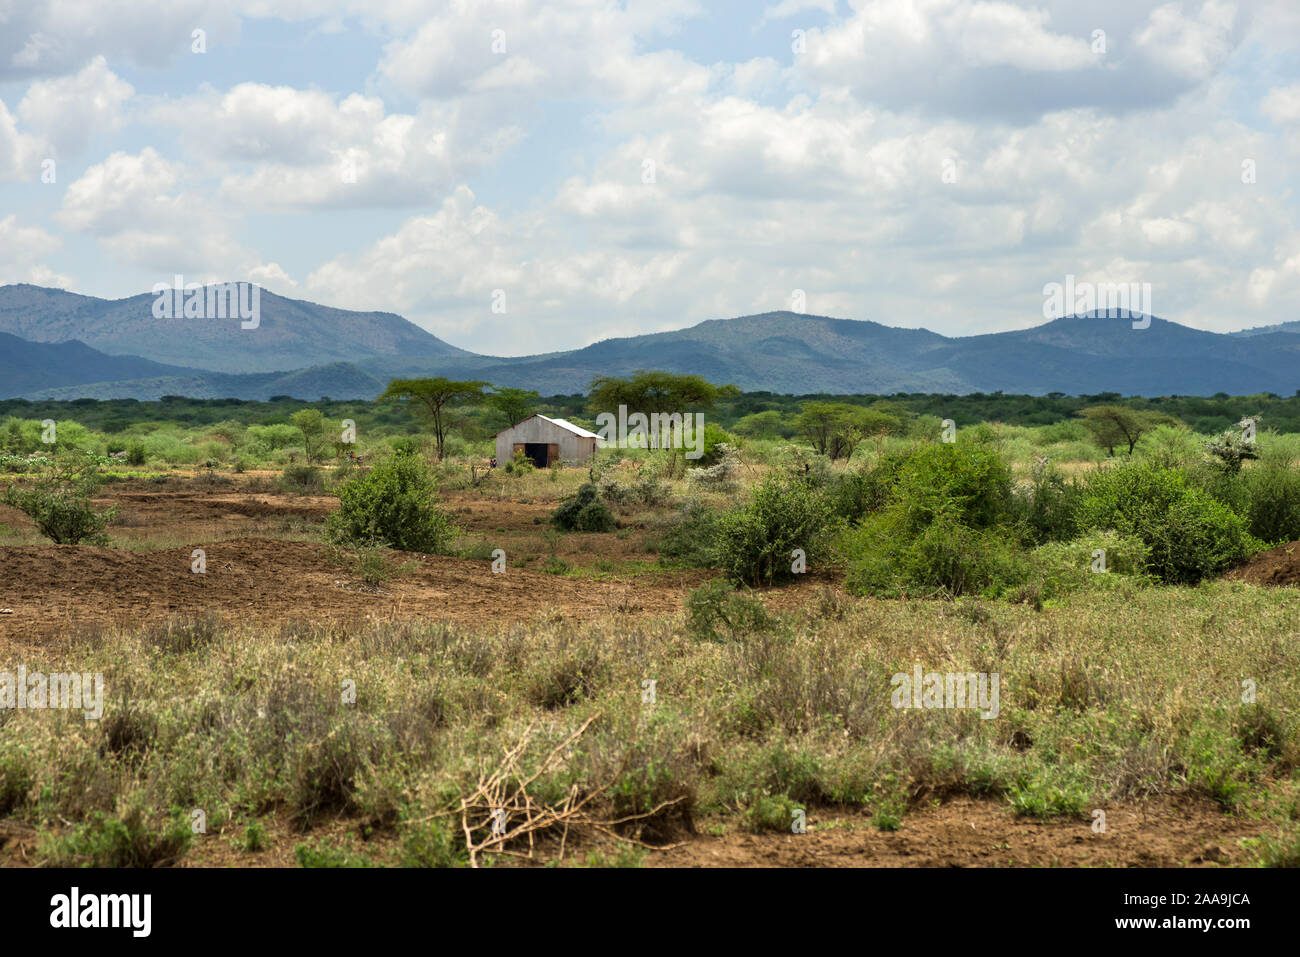 A corrugated metal building amongst scrubland and trees with hills in background, Kajiado County, Kenya Stock Photo